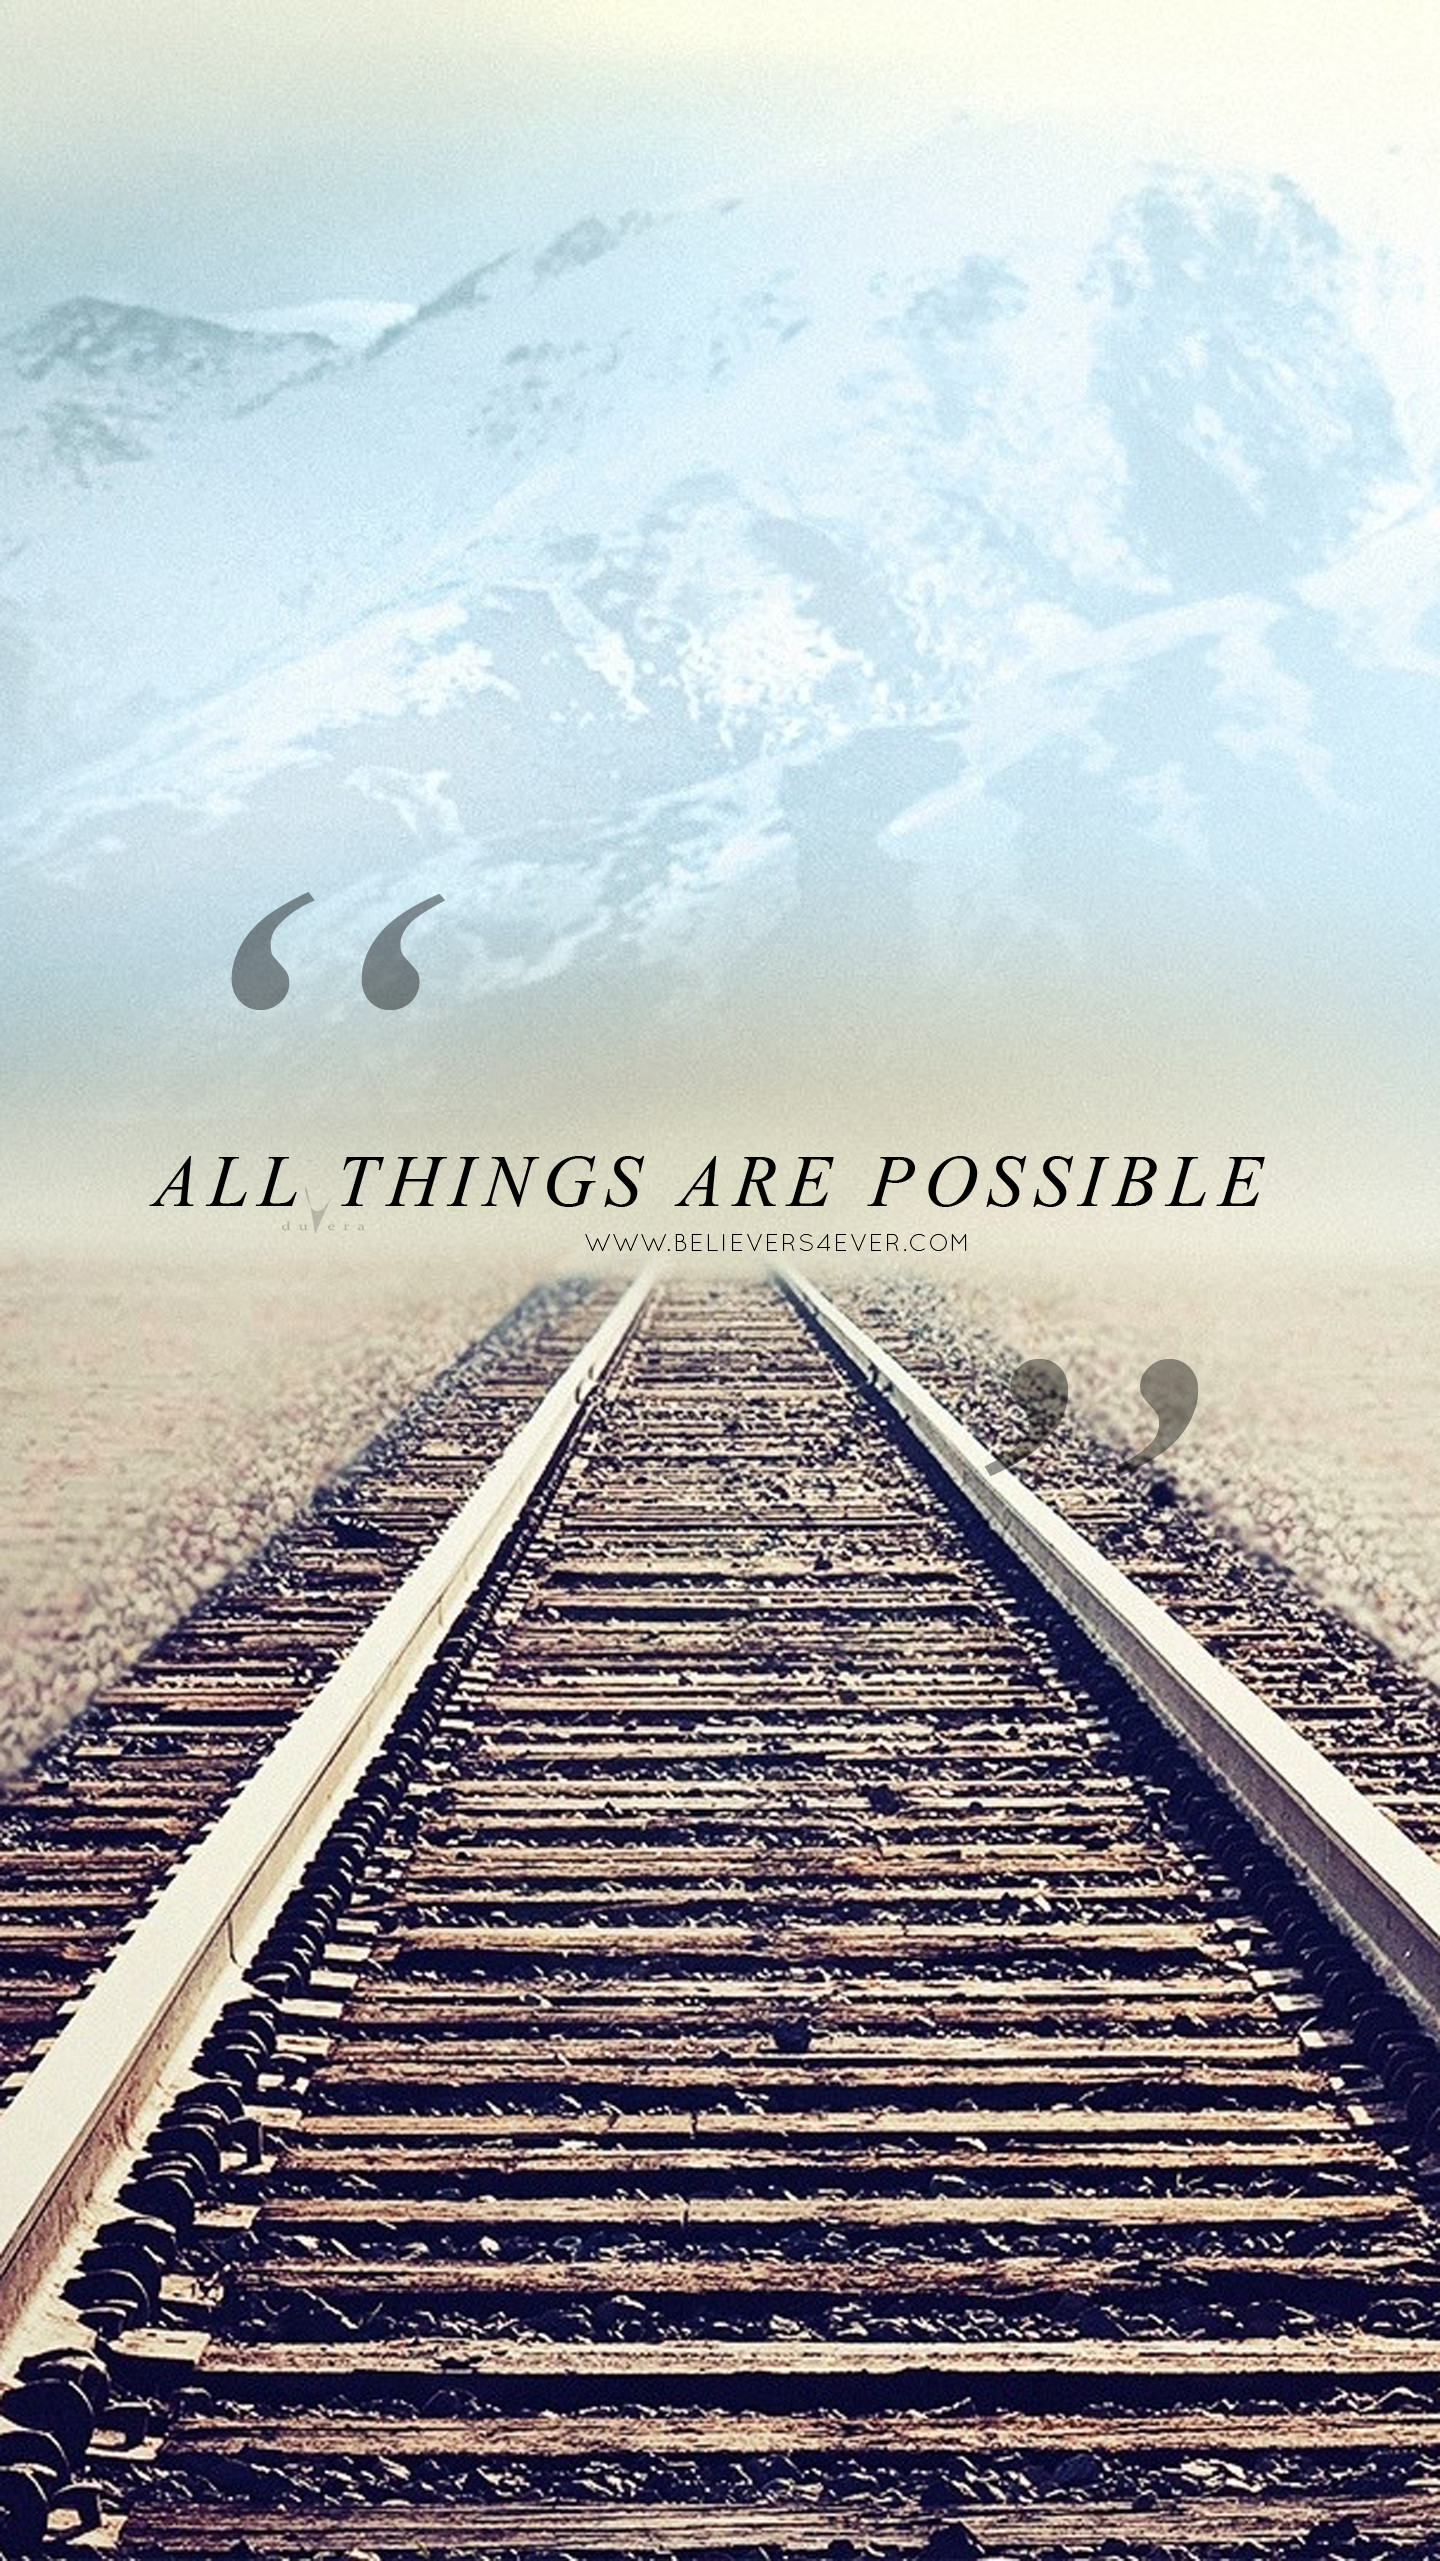 1440x2561 All things are possible Christian mobile lock screen wallpaper